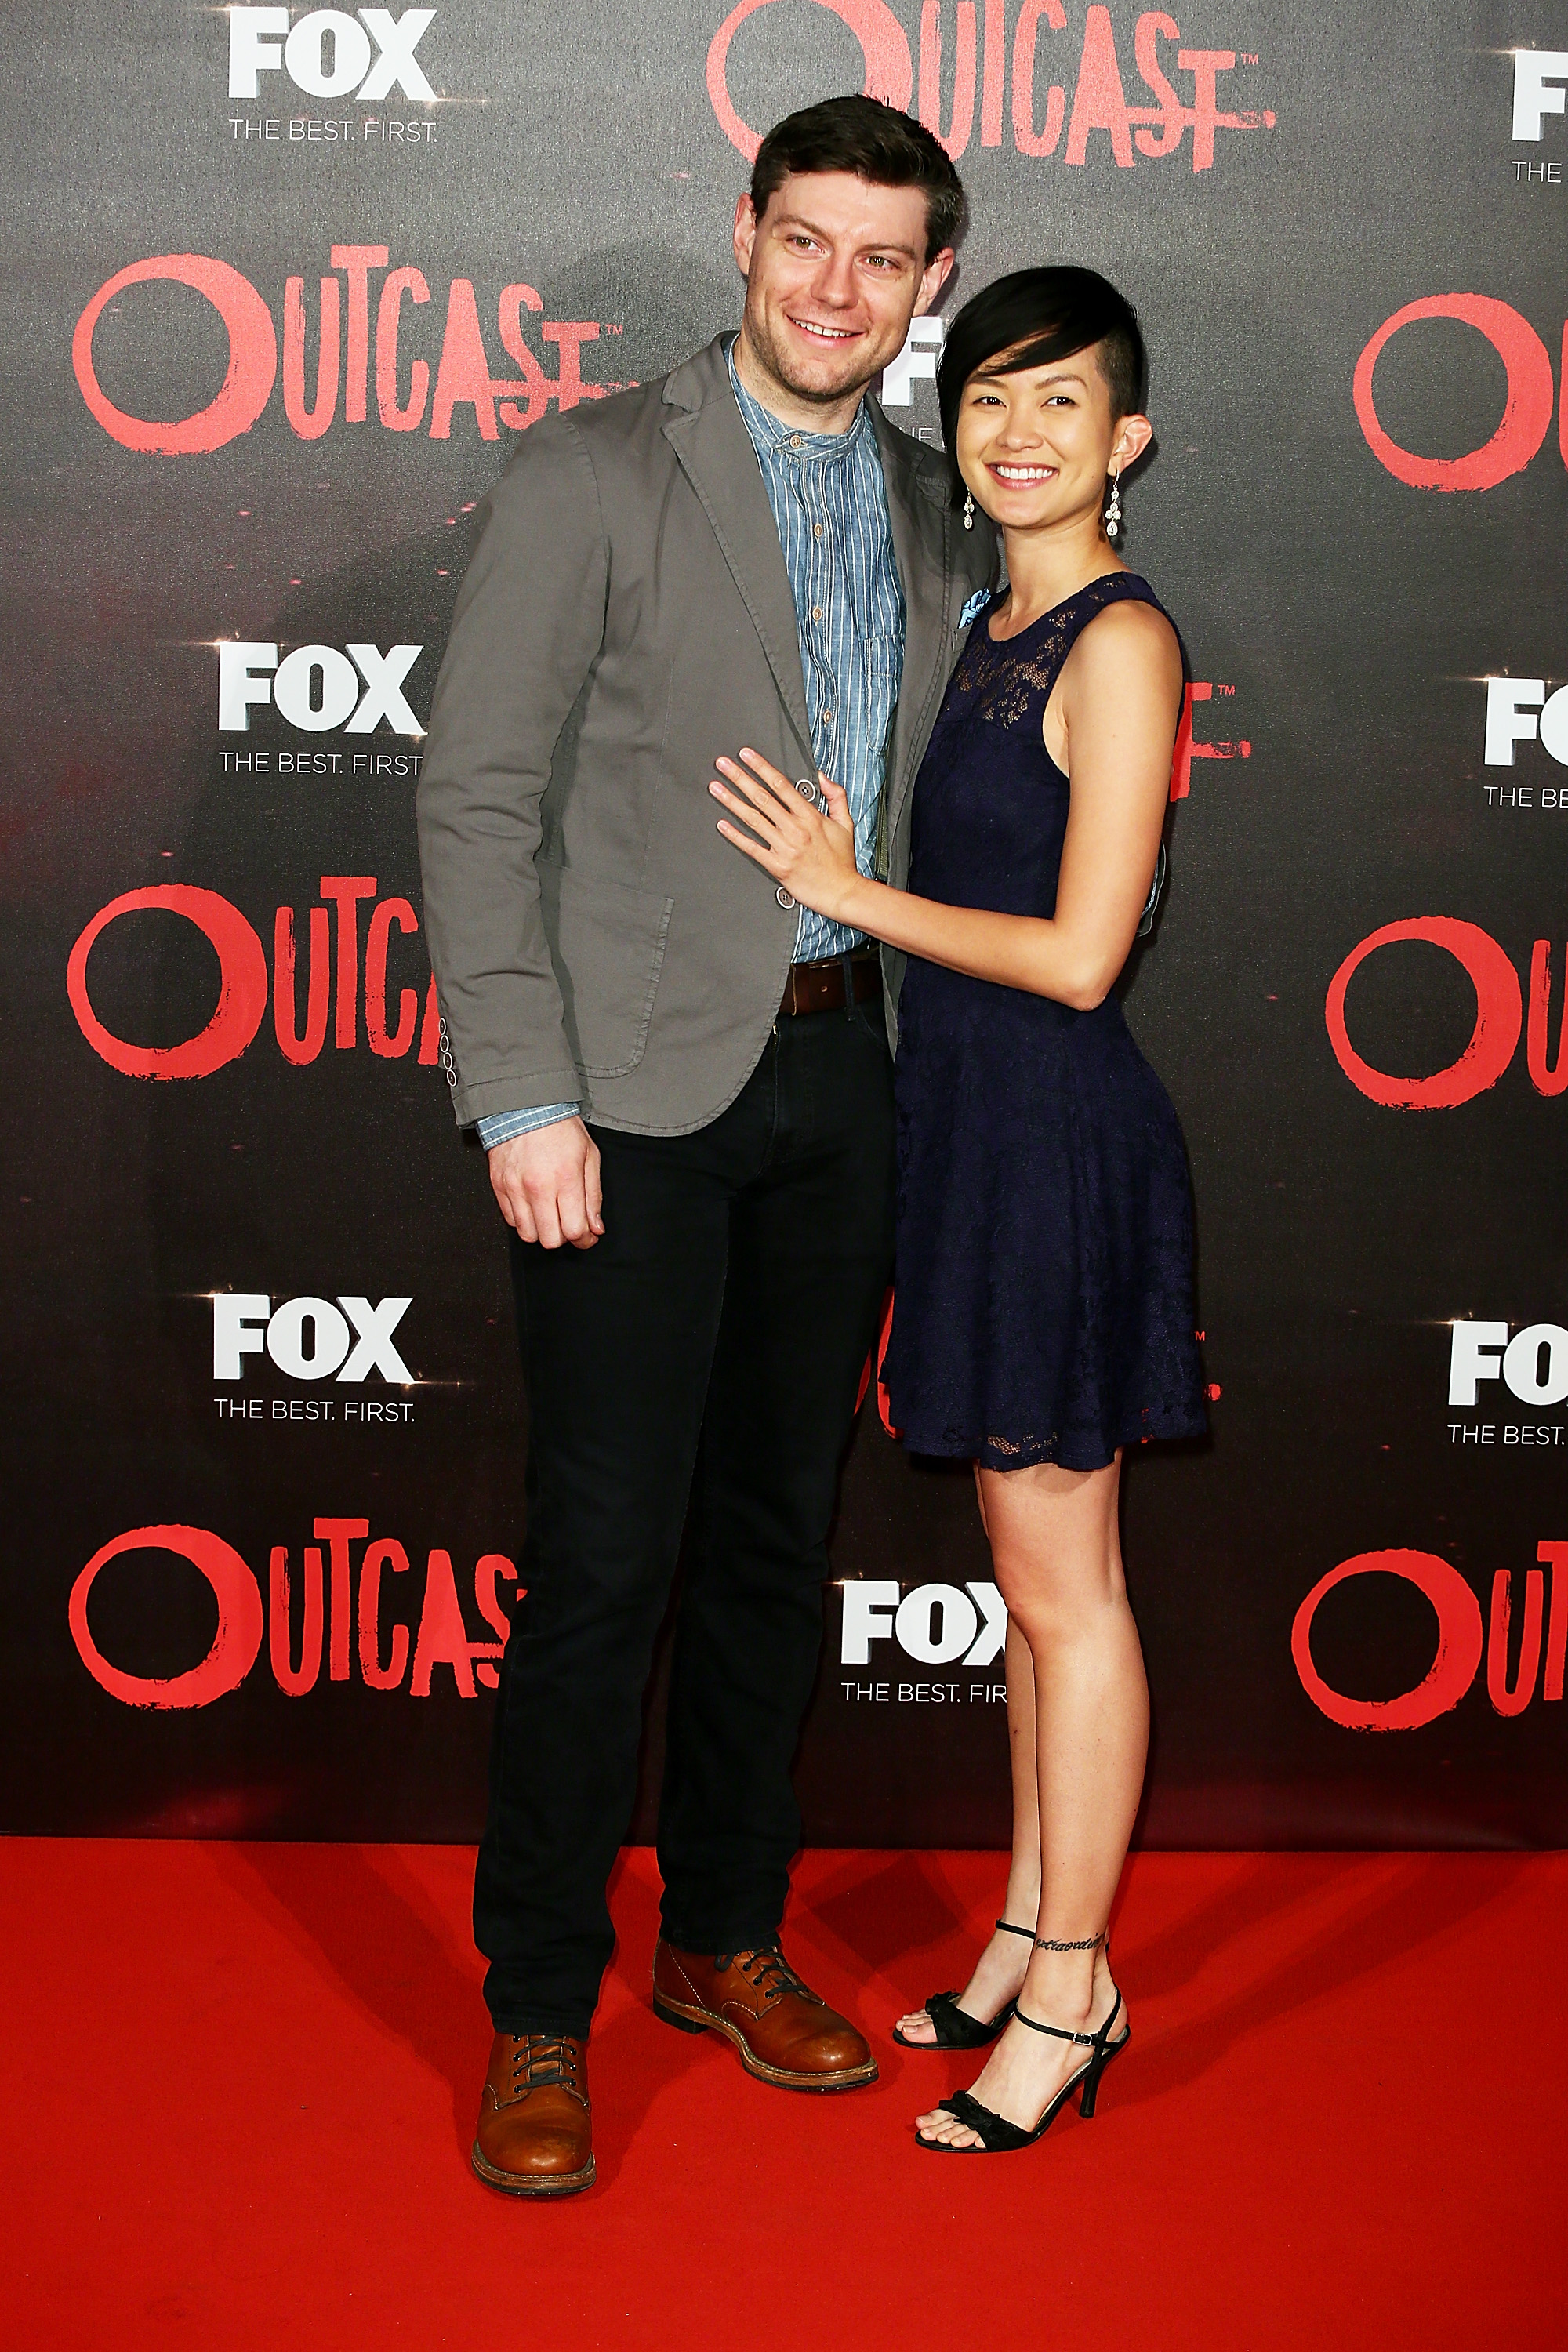 Patrick Fugit and Jenny Del Rosario during the "Outcast" premiere at Auditorium Della Conciliazione on April 19, 2016, in Rome, Italy. | Source: Getty Images